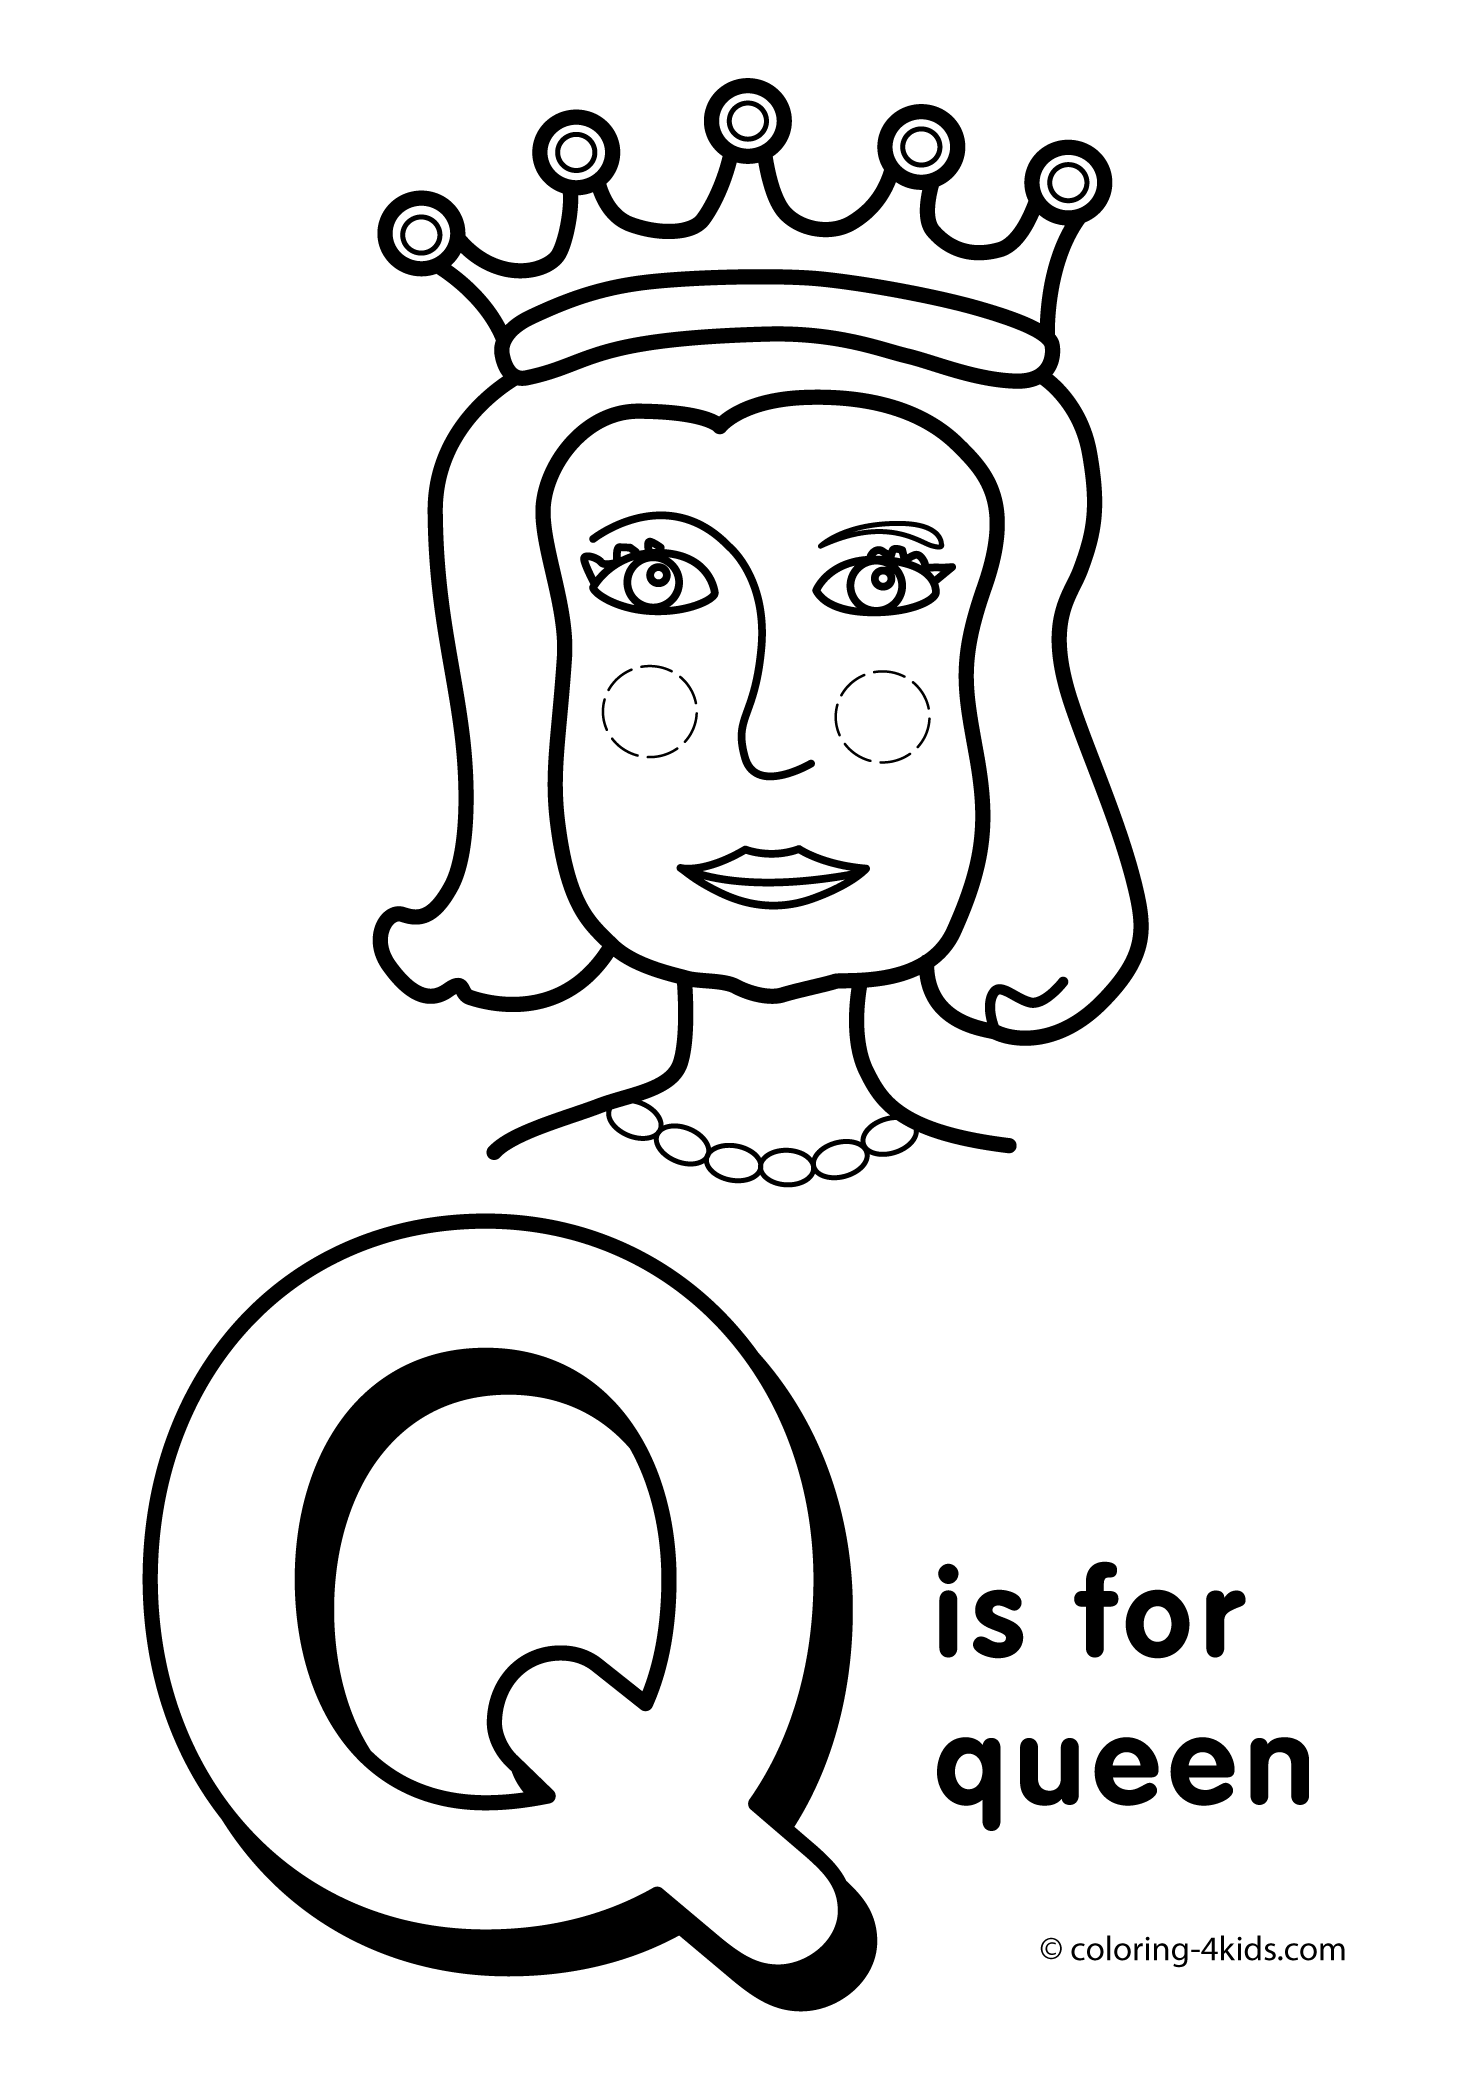 Letter Q Coloring Pages Preschool - High Quality Coloring Pages